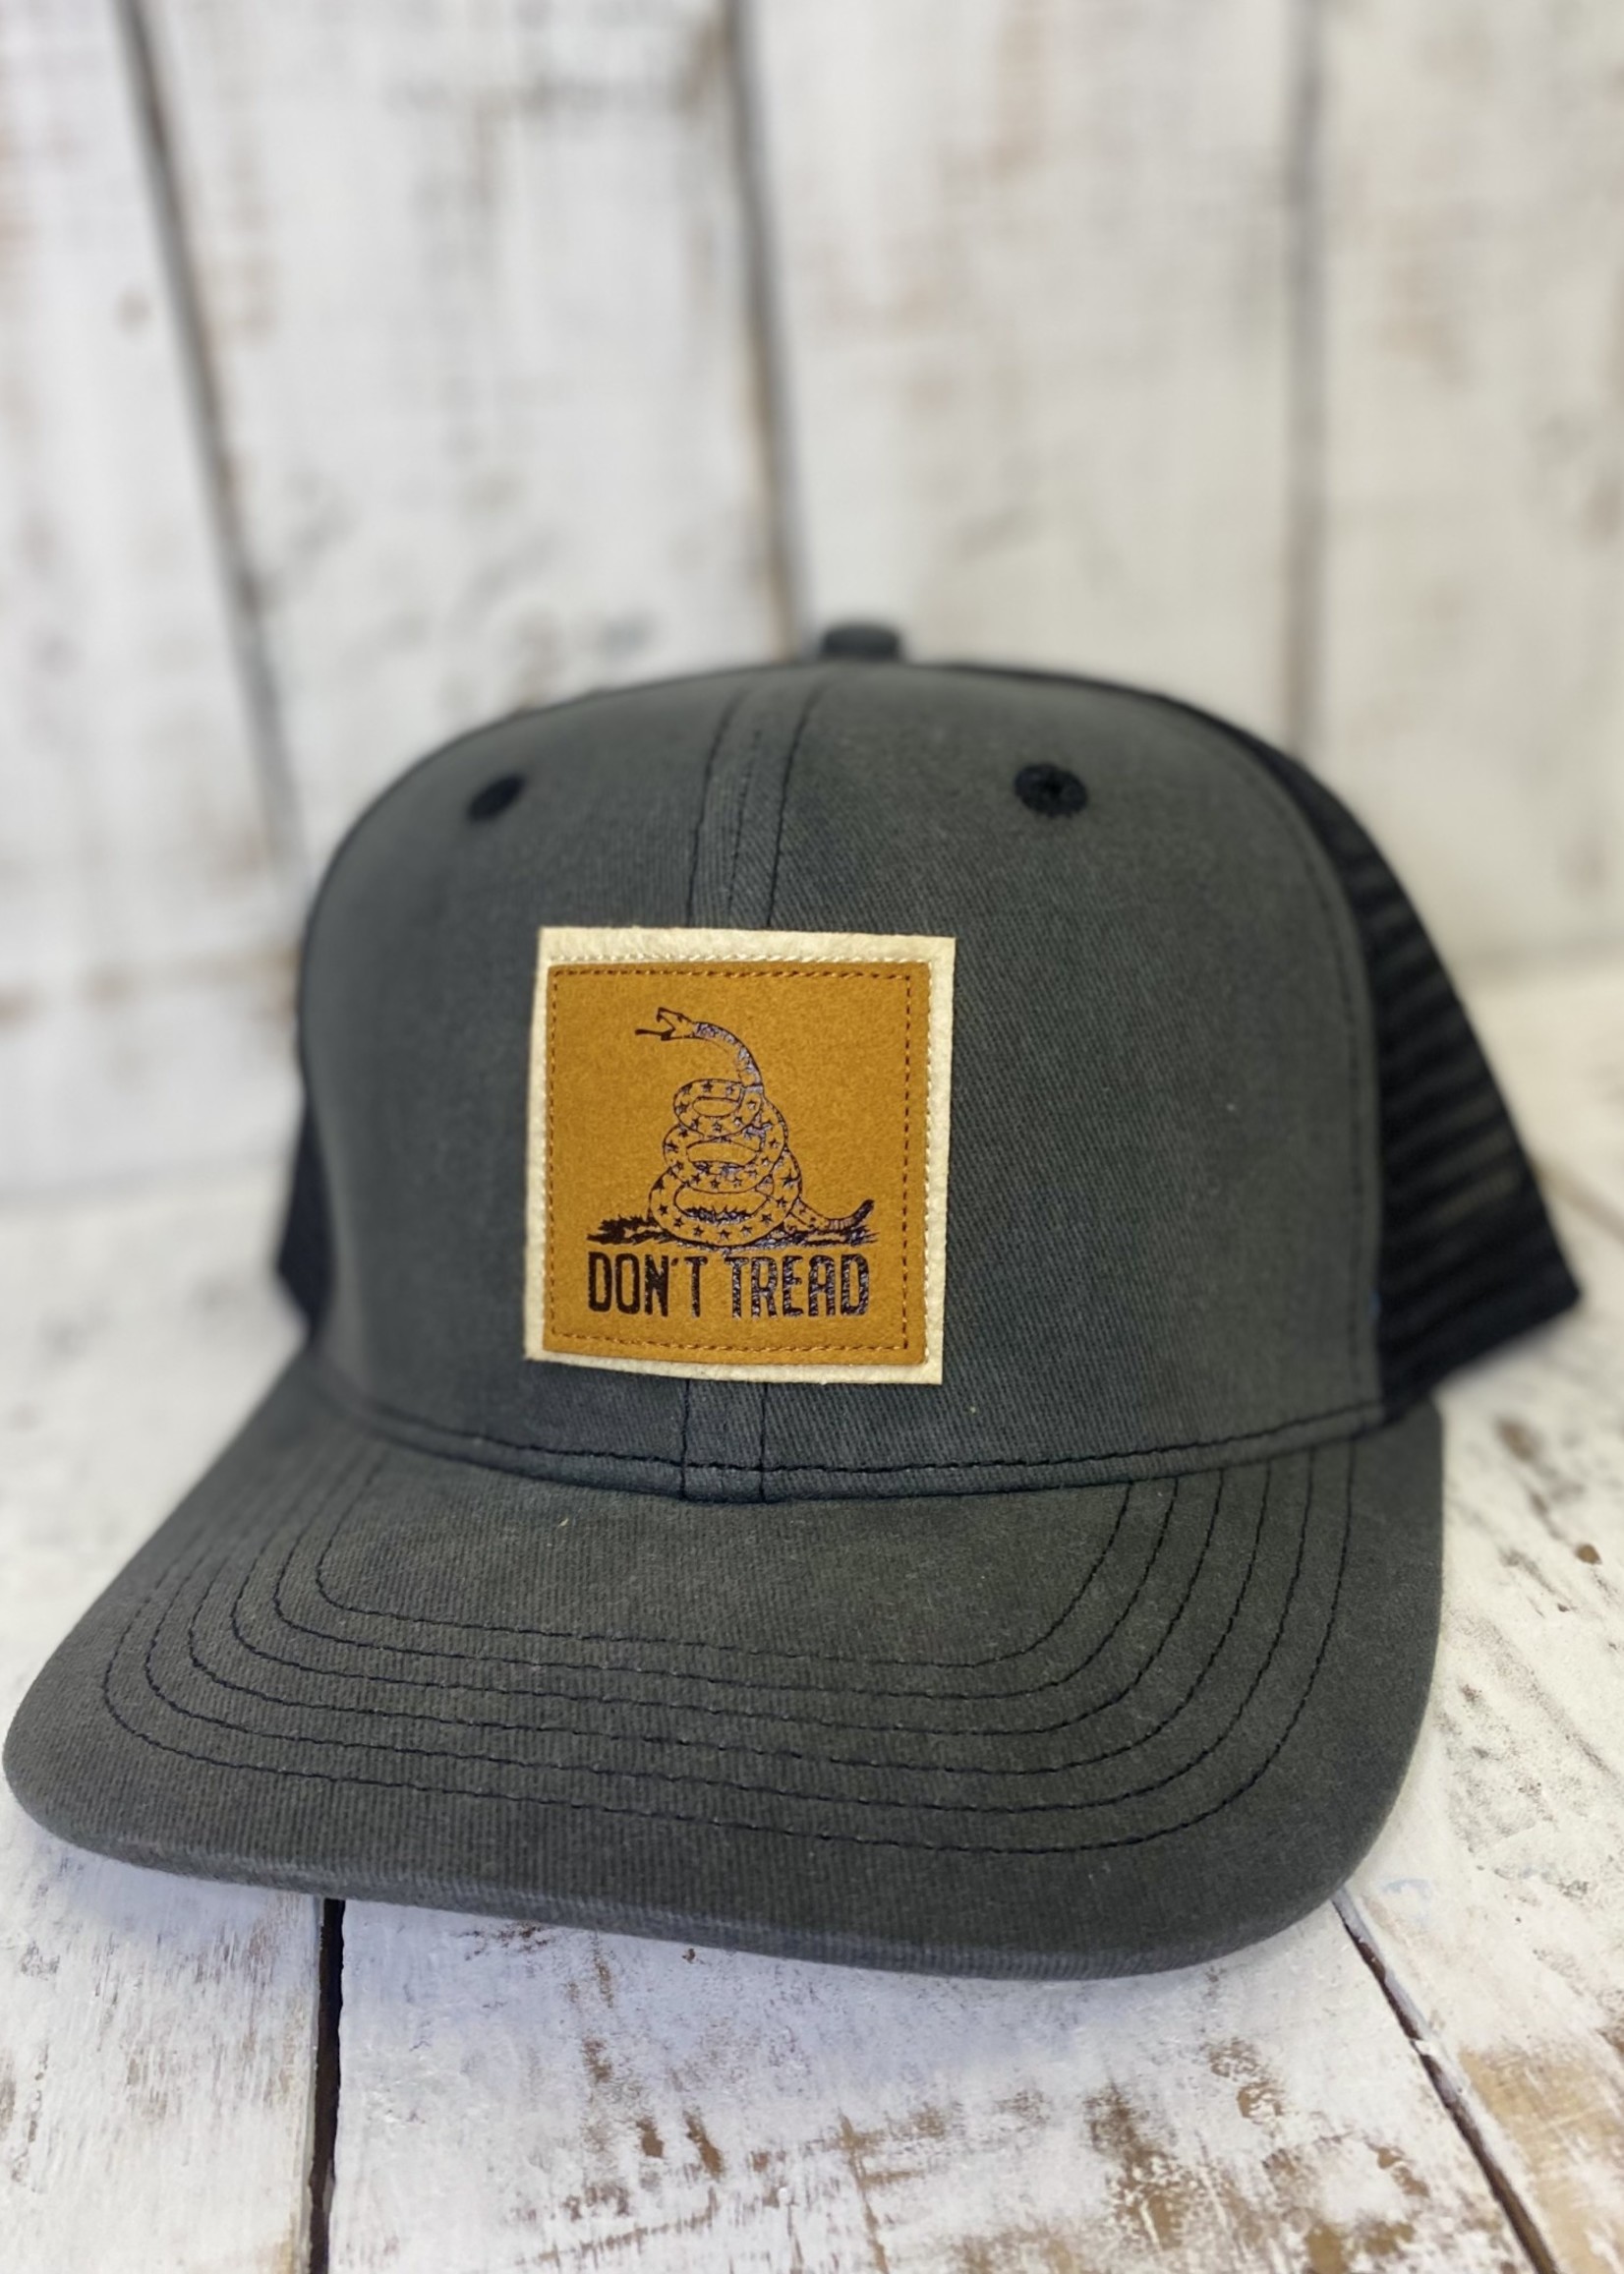 Southern Fried Cotton Don't Tread Patch